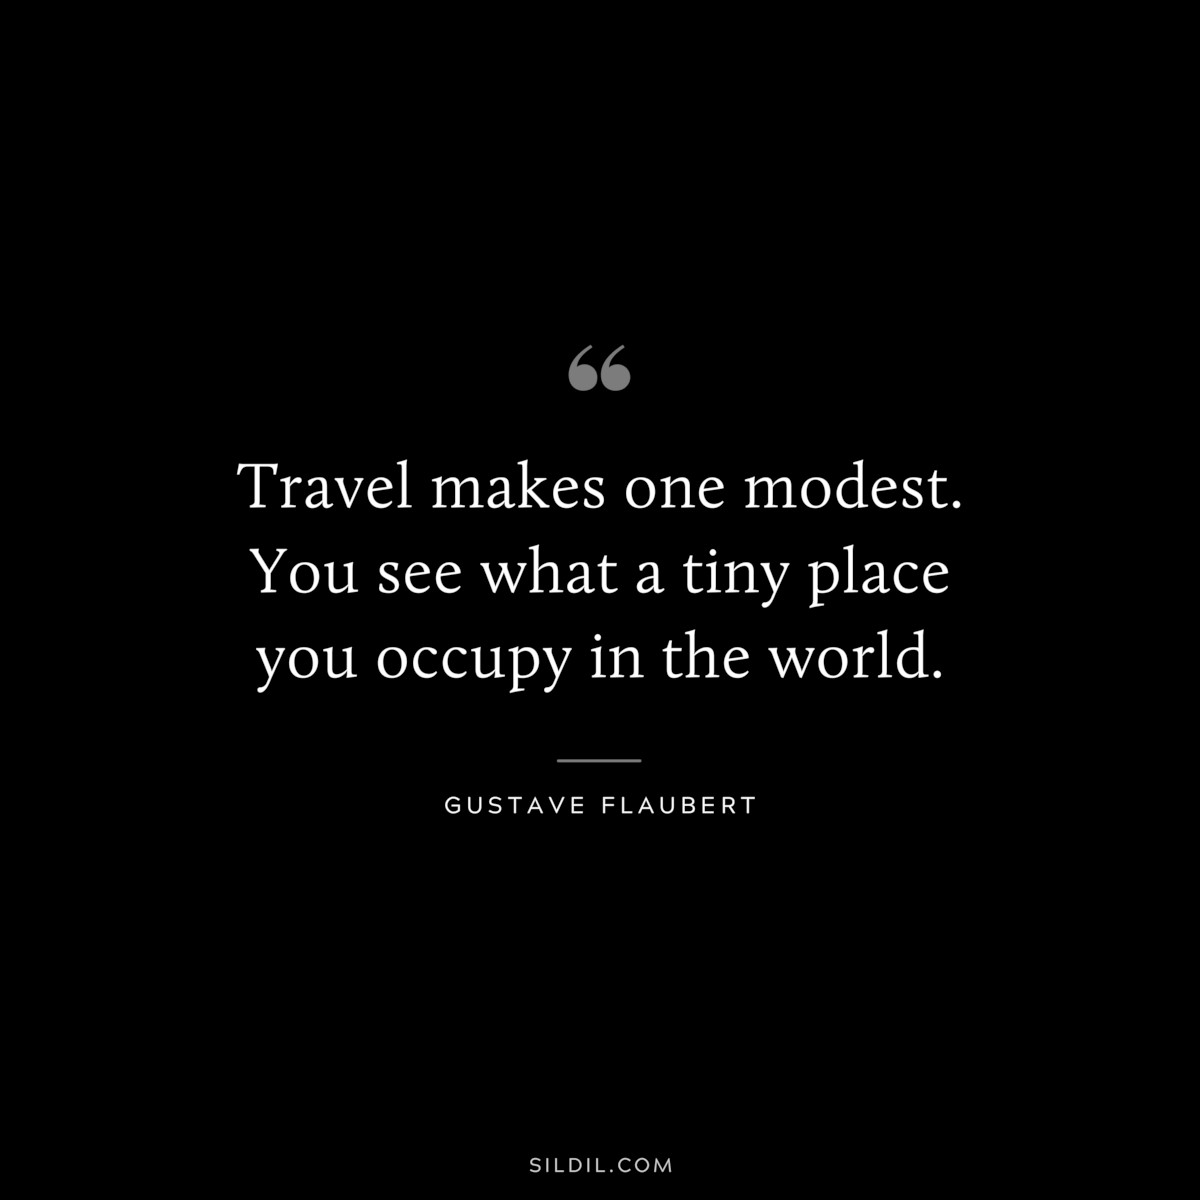 Travel makes one modest. You see what a tiny place you occupy in the world. ― Gustave Flaubert